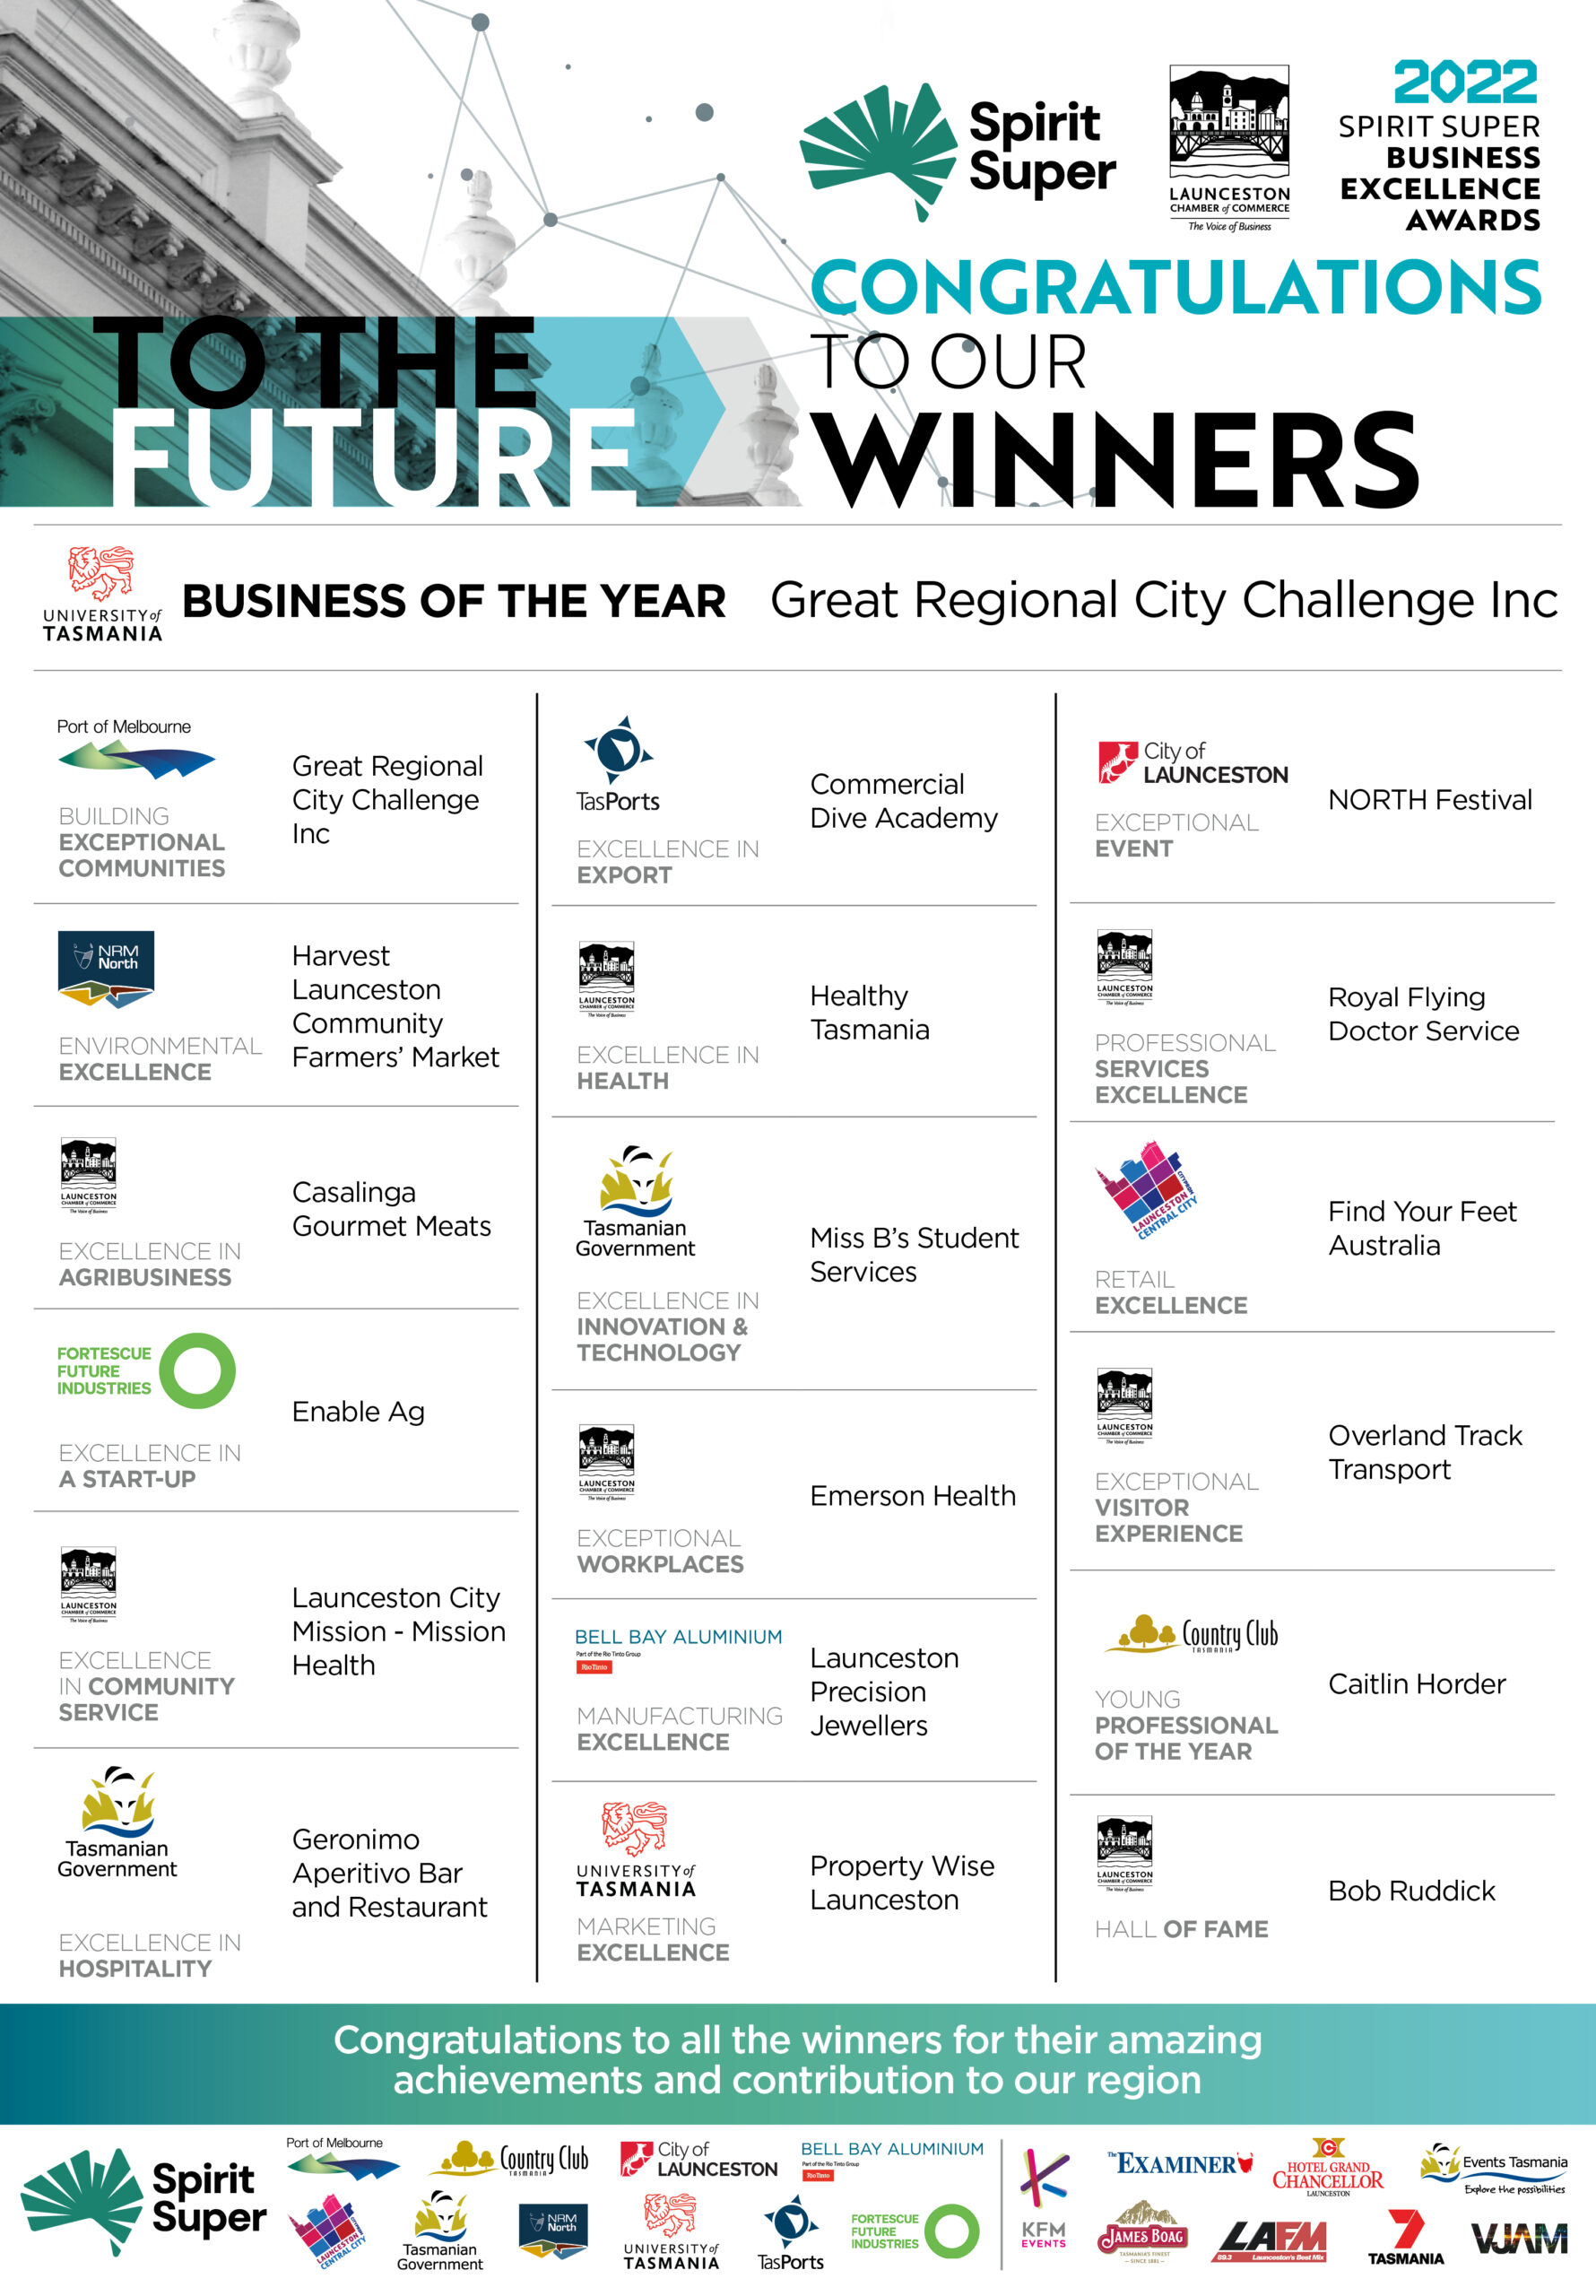 All the winners from the 2022 Spirit Super Business Excellence Awards